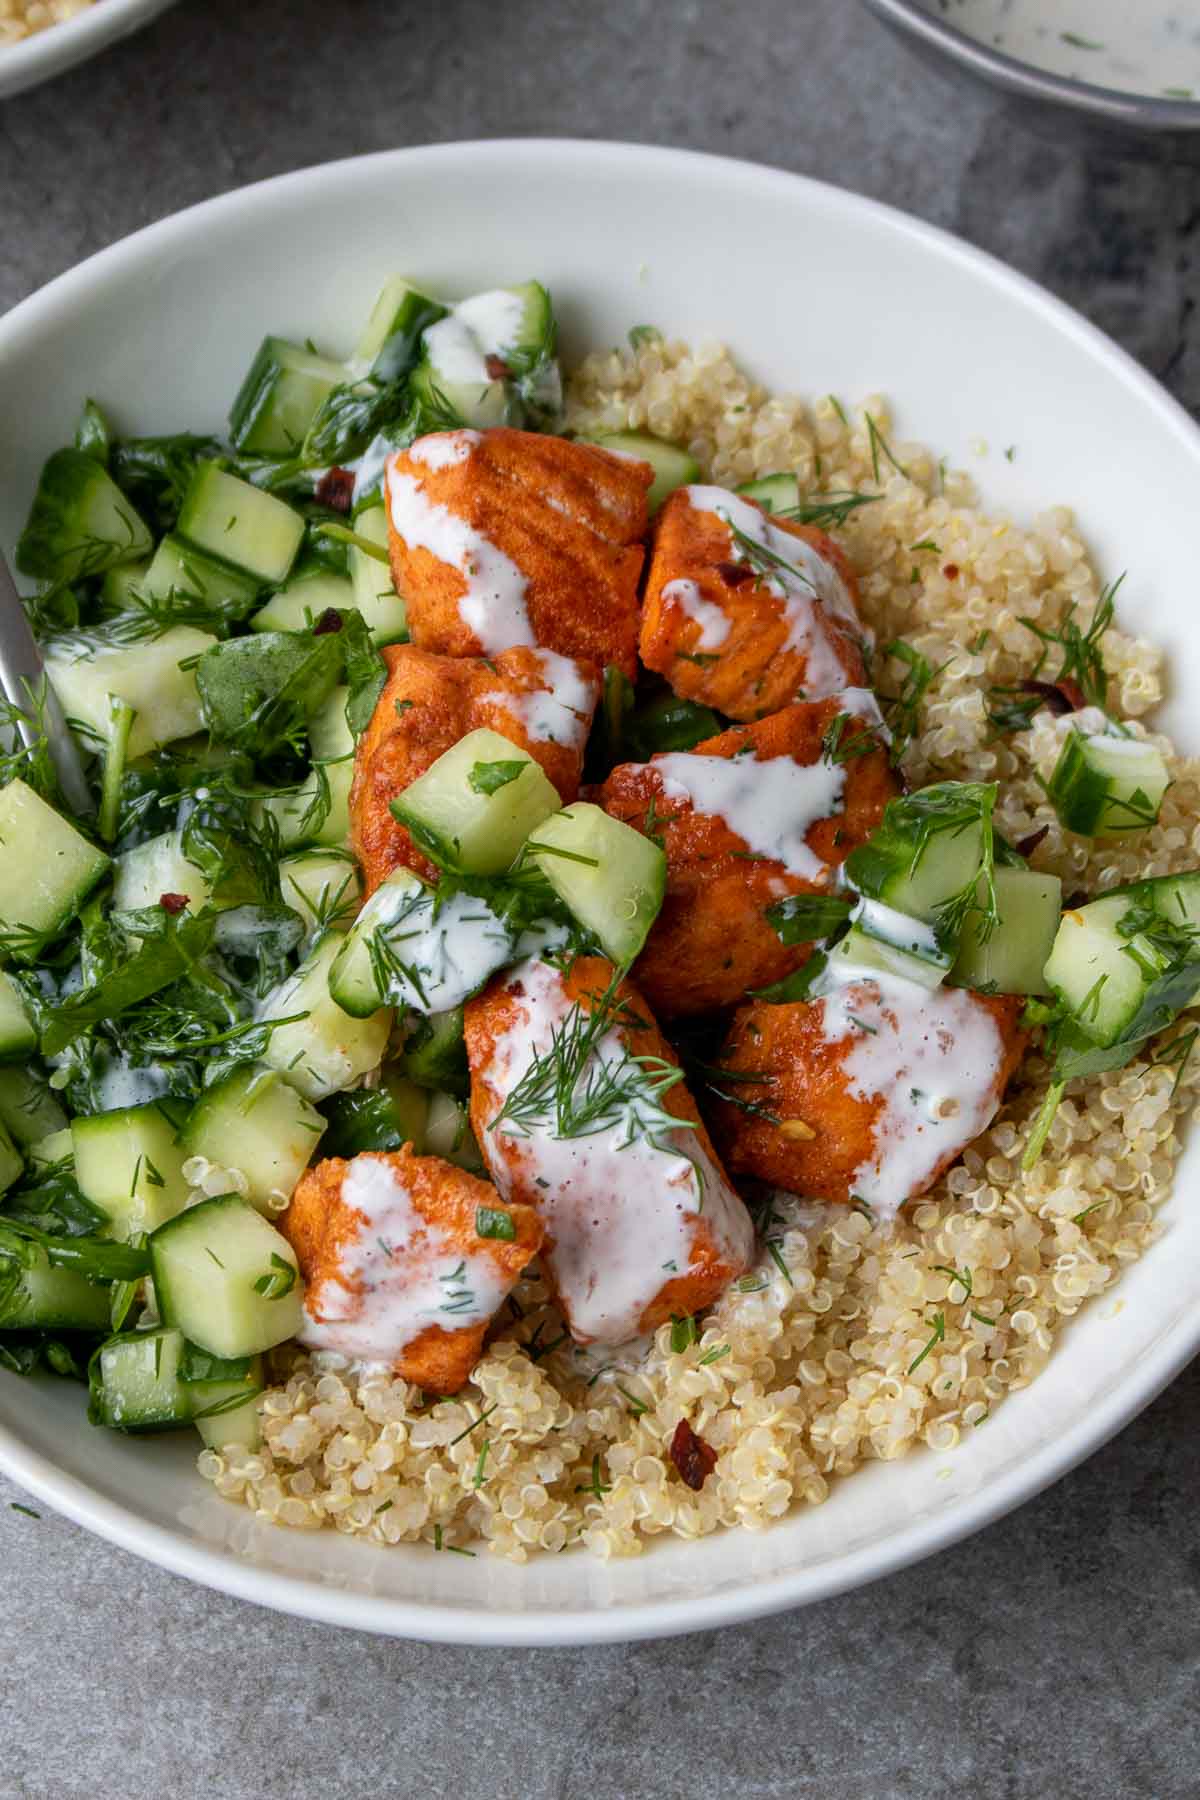 Baked salmon and quinoa bowl with cucumber salad and dressing.